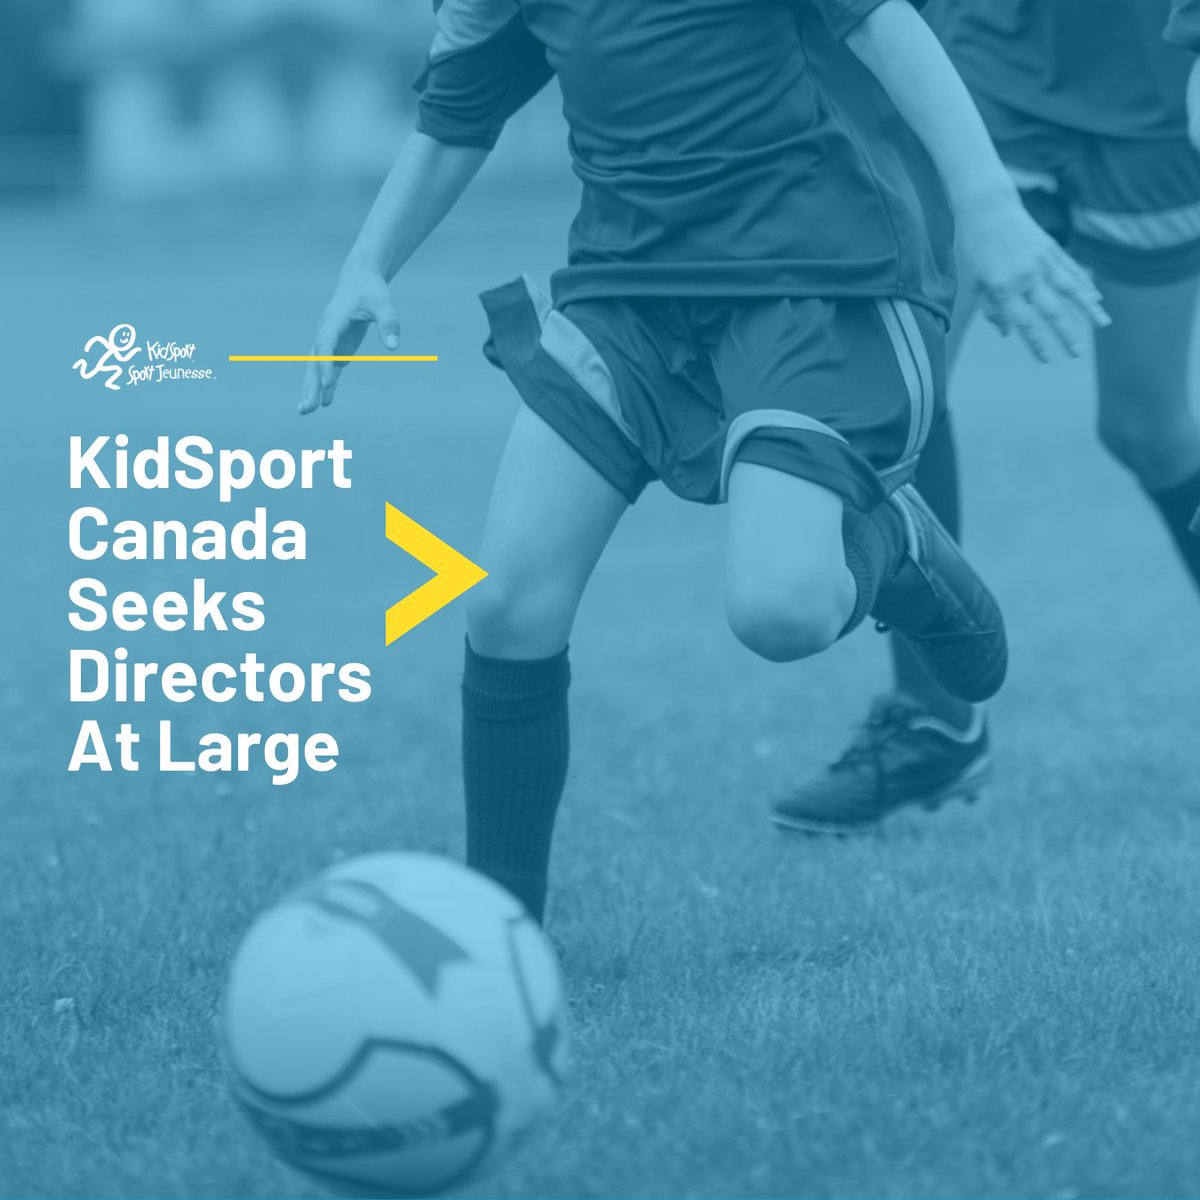 For the first time in its history, KidSport Canada is seeking the recruitment of Directors at Large for the KidSport Canada Board of Directors from outside the national organization. For more info: ow.ly/rkti50QWaGu #SoALLKidsCanPlay